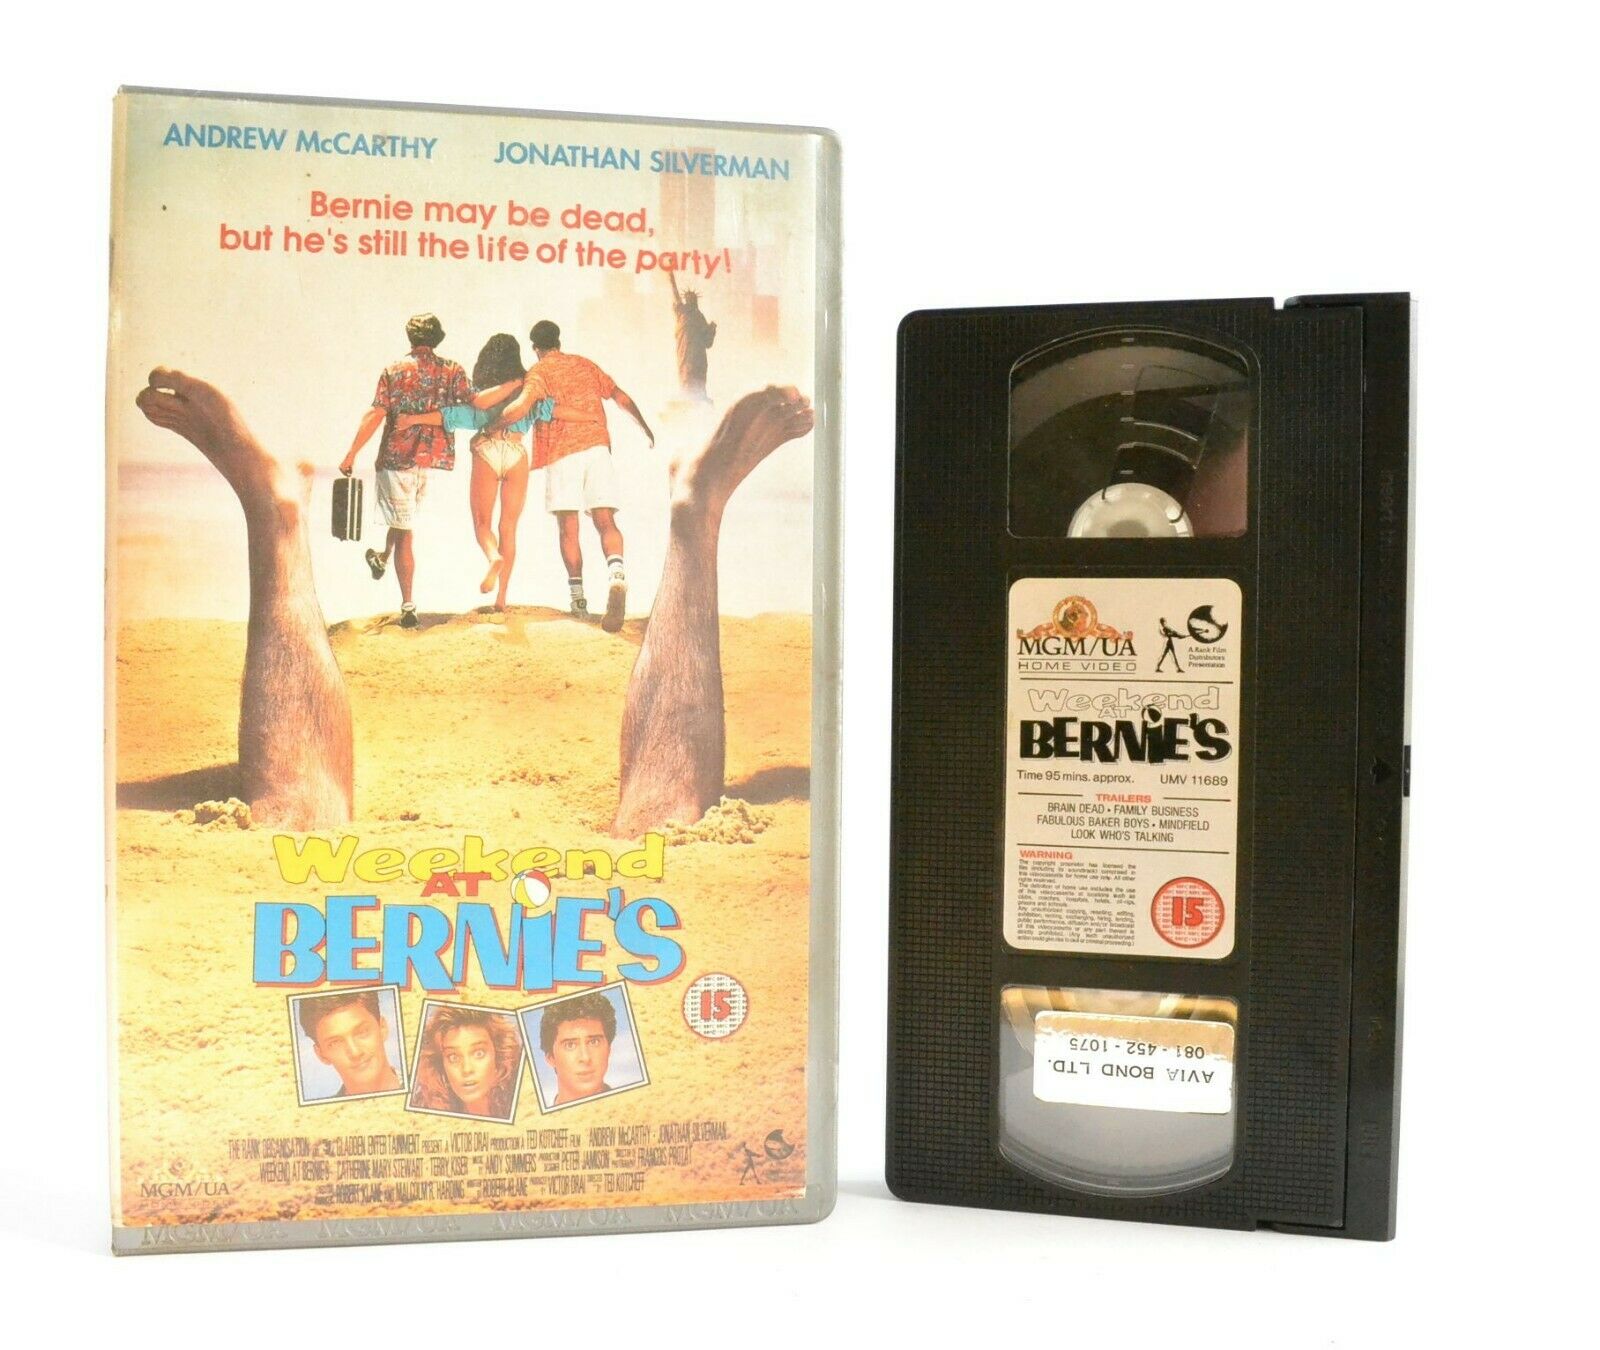 Weekend At Bernie's: Comedy Classic (1989) - Large Box - Hell Of A Party - VHS-